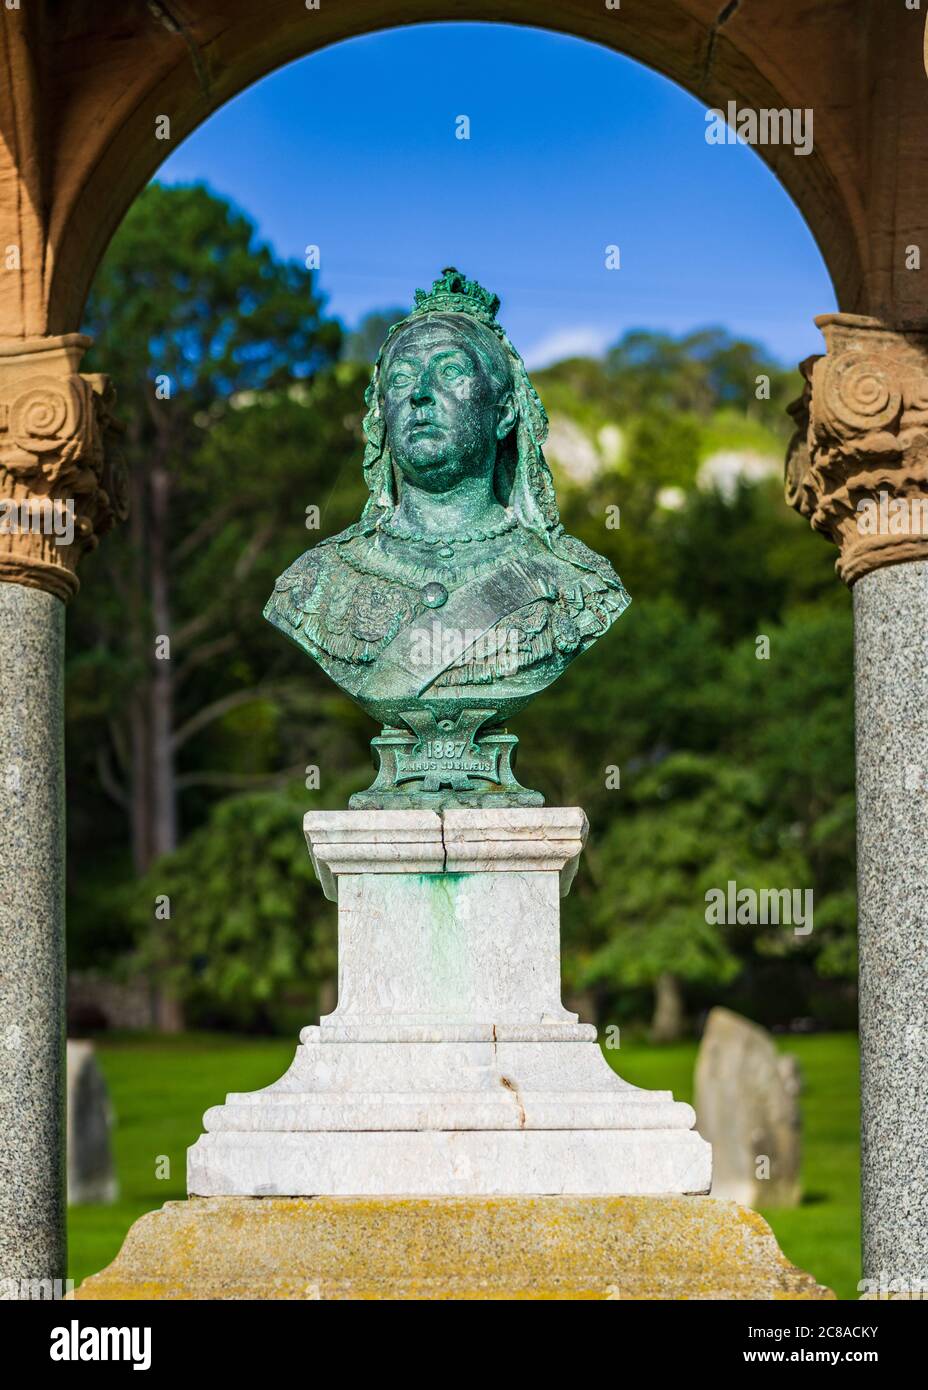 Queen Victoria Bust and Monument in Happy Valley Llandudno N Wales. Erected to commemorate the Jubilee of her reign in 1887. Sculptor Horace Montford. Stock Photo